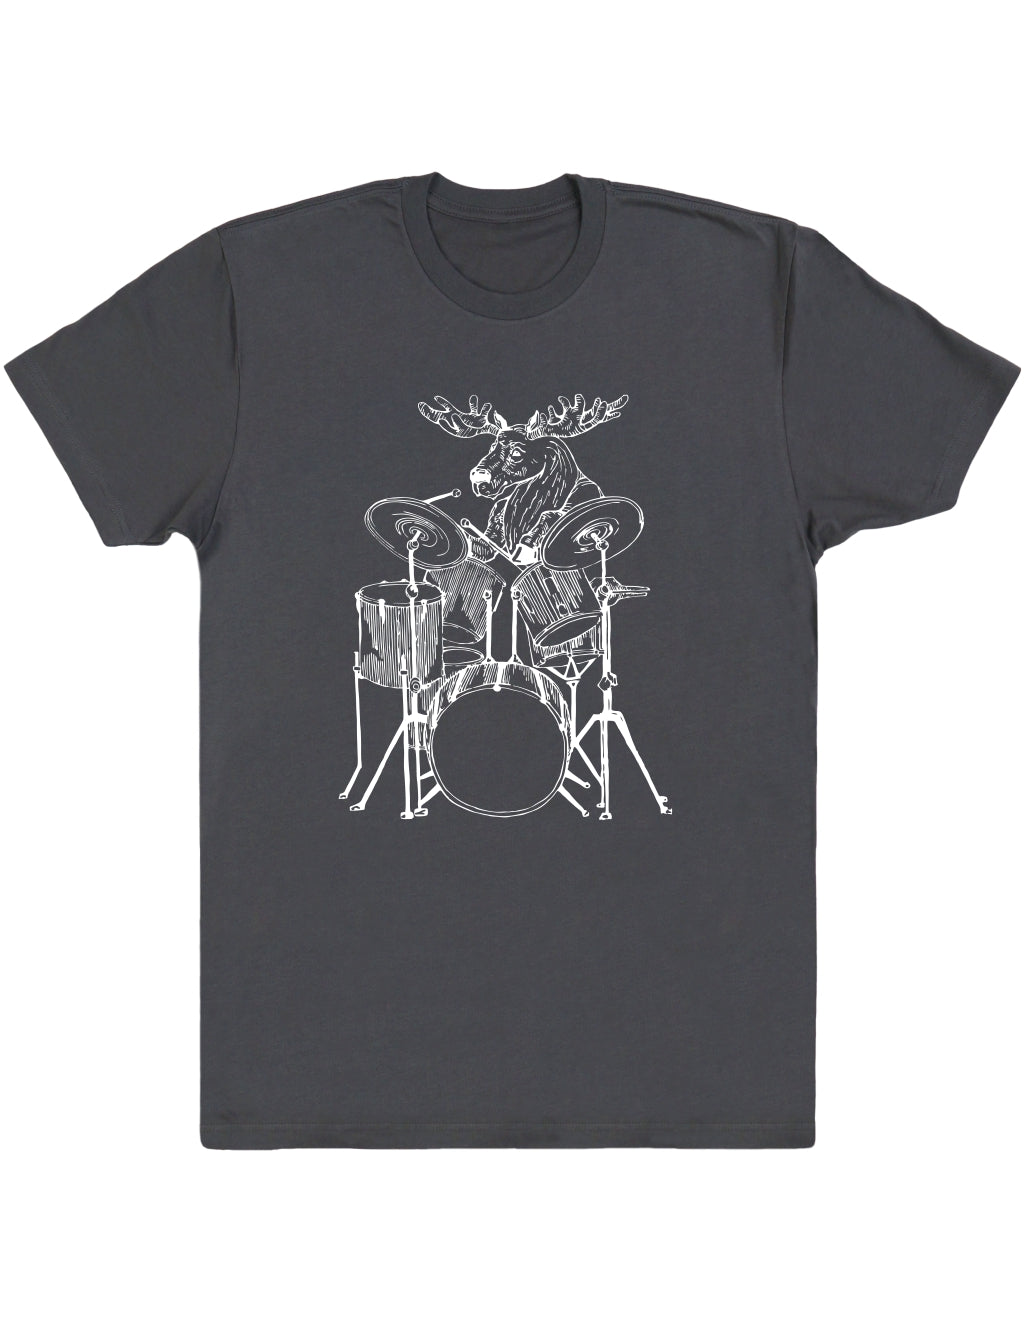 SEEMBO Moose Playing Drums Funny Drummer Musician Band Men Cotton T-Shirt